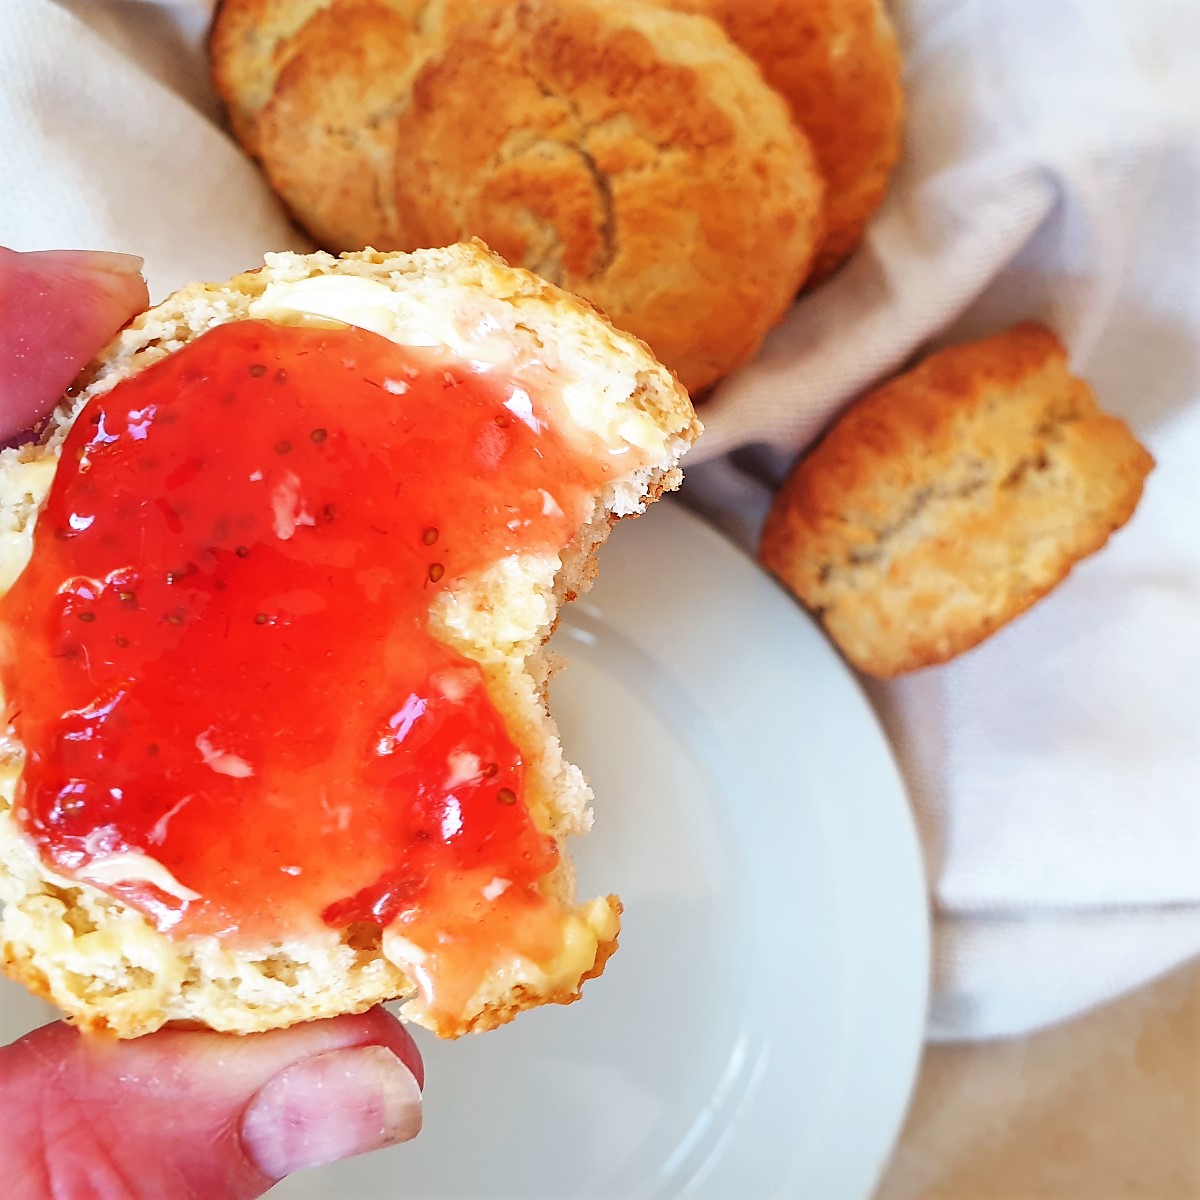 A scone covered in strawberry jam with a bite taken from it.